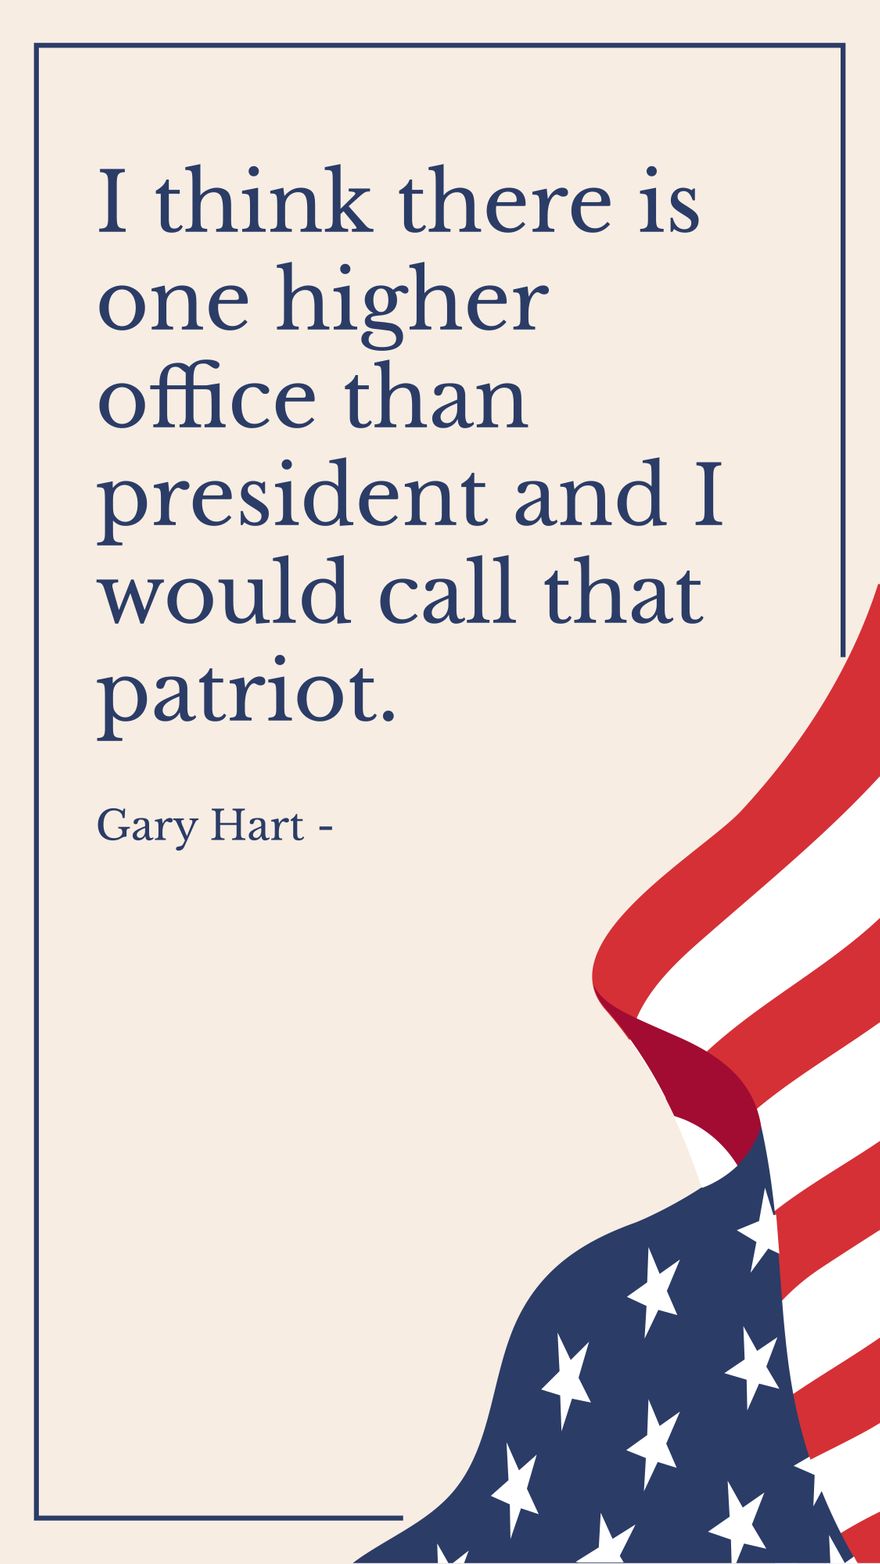 Free Gary Hart - I think there is one higher office than president and I would call that patriot.